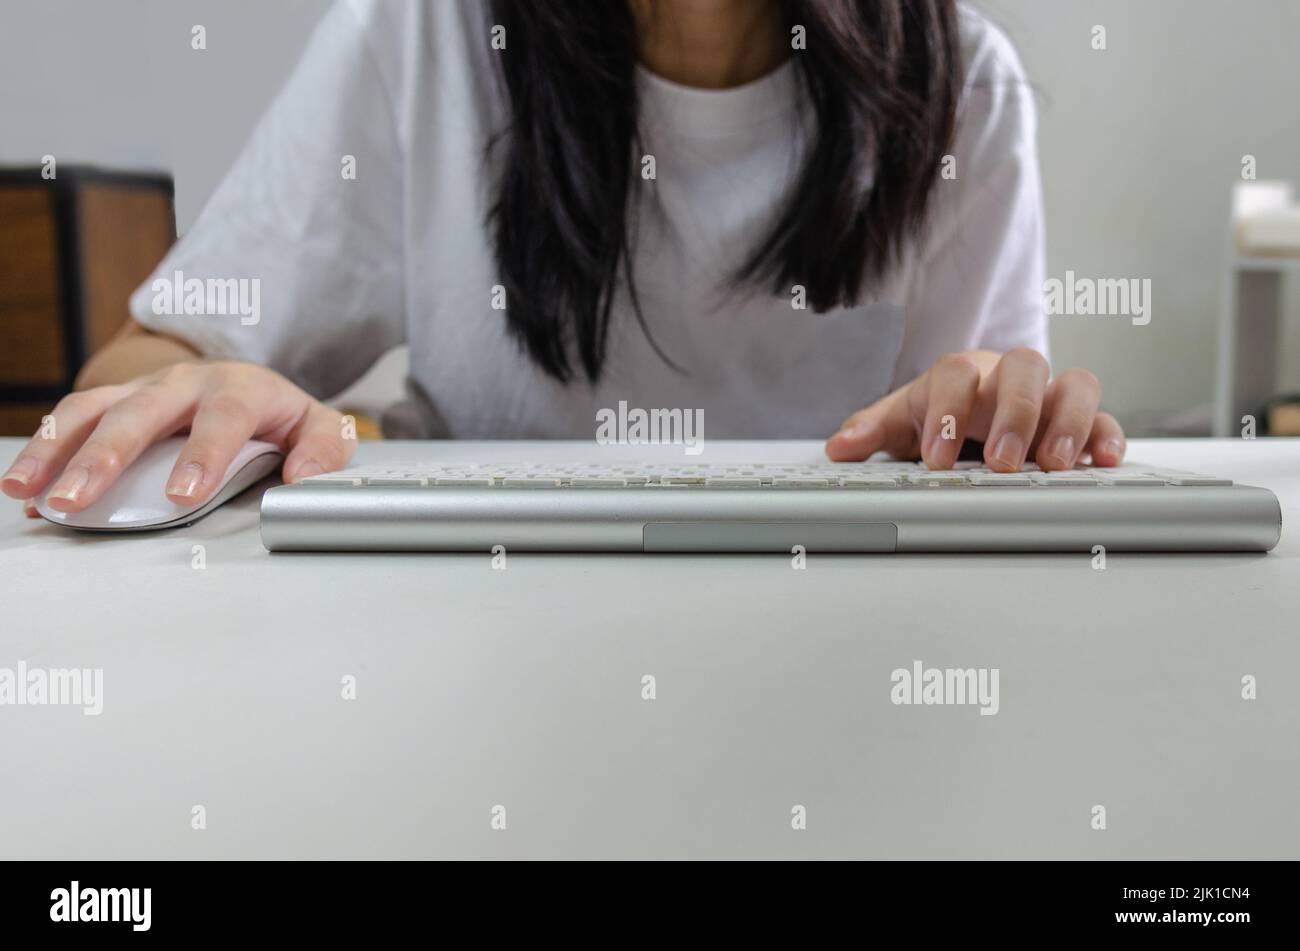 Female person holding mouse and keyboard computer. Technology internet ...